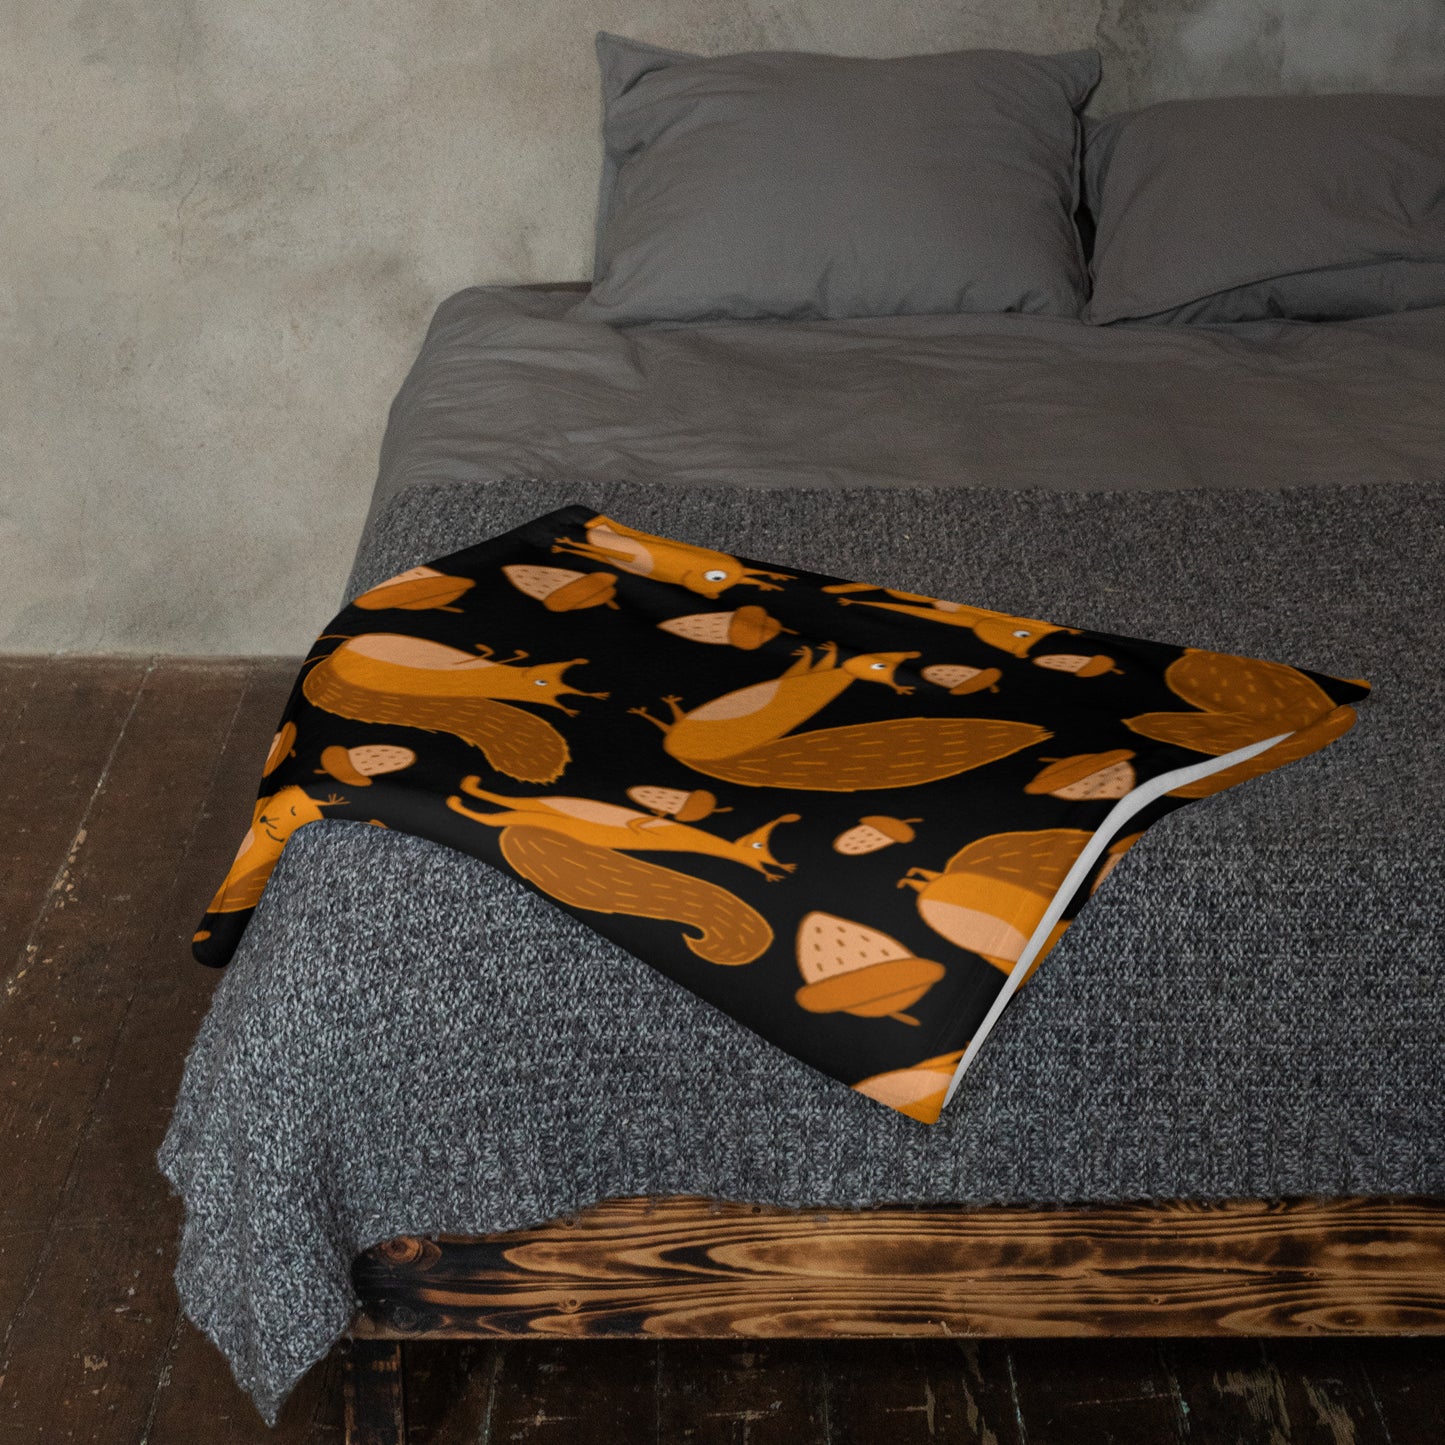 Throw blanket black color with funny orange squirrels and nuts on bed